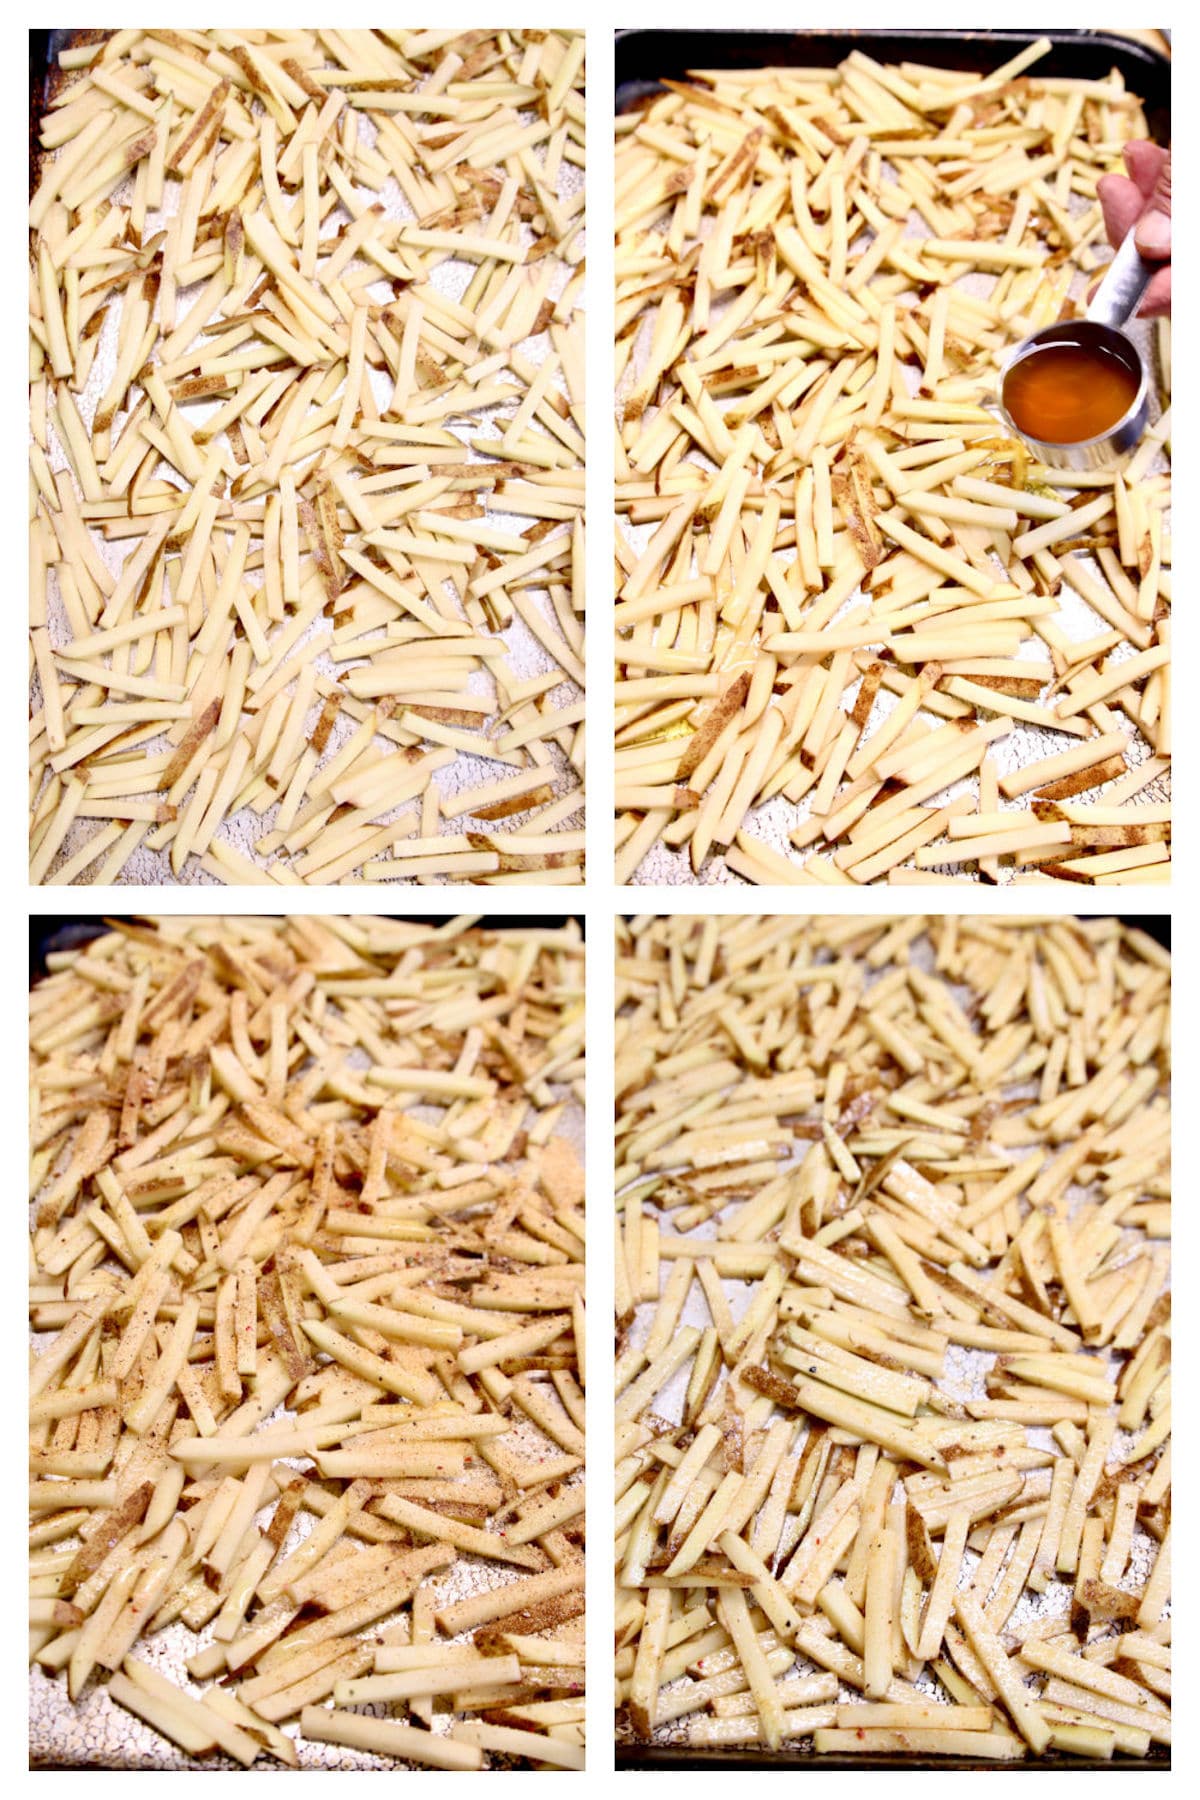 collage of sheet pan of shoestring fries, adding duck fat, ,seasonings and tossing to bake.